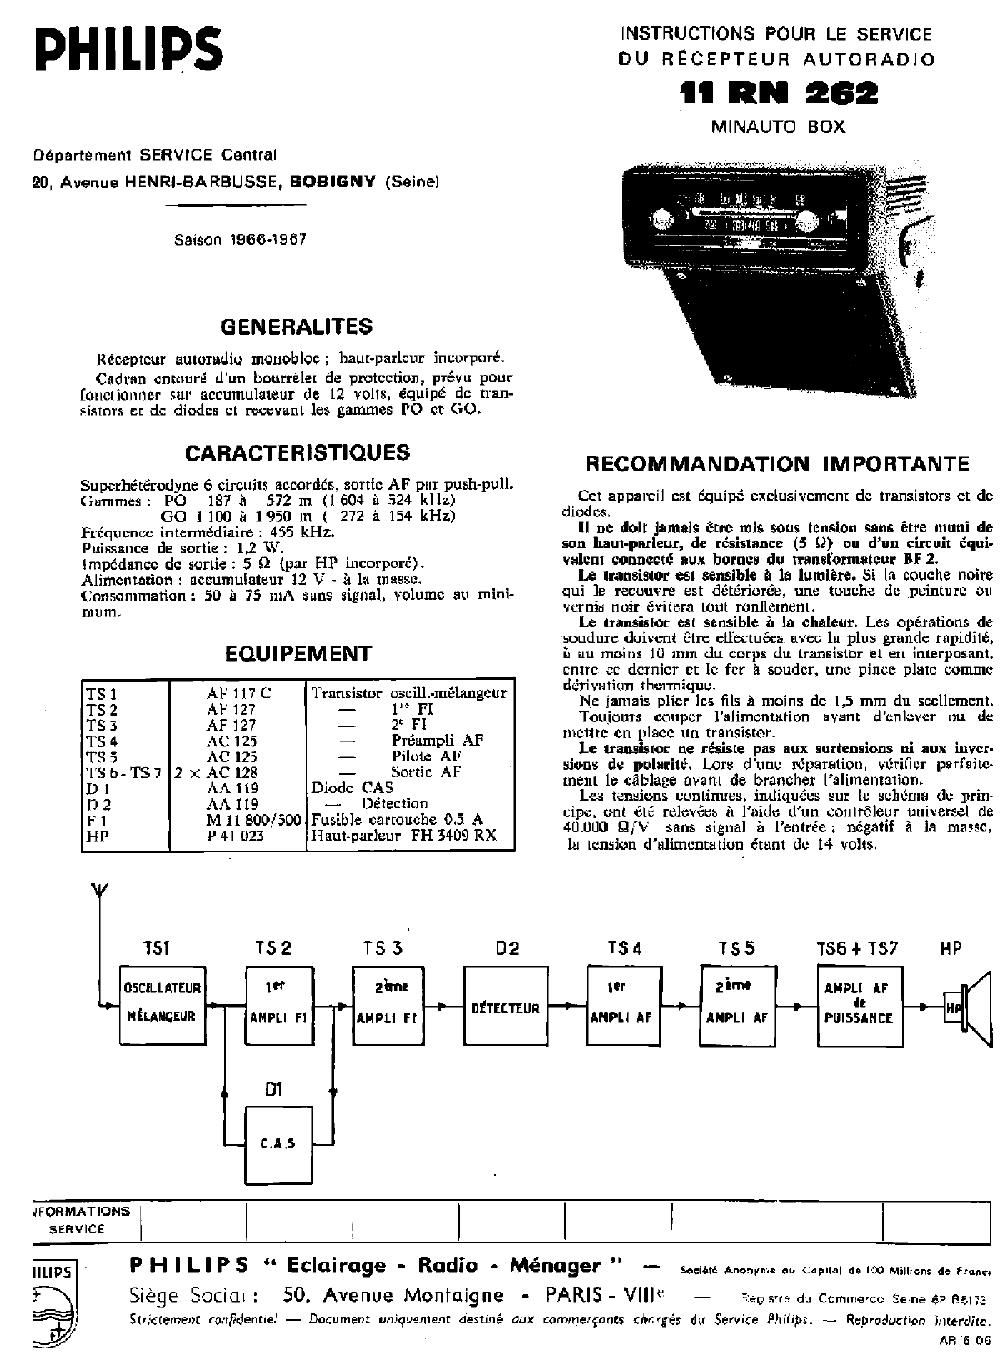 philips 11 rn 262 service manual